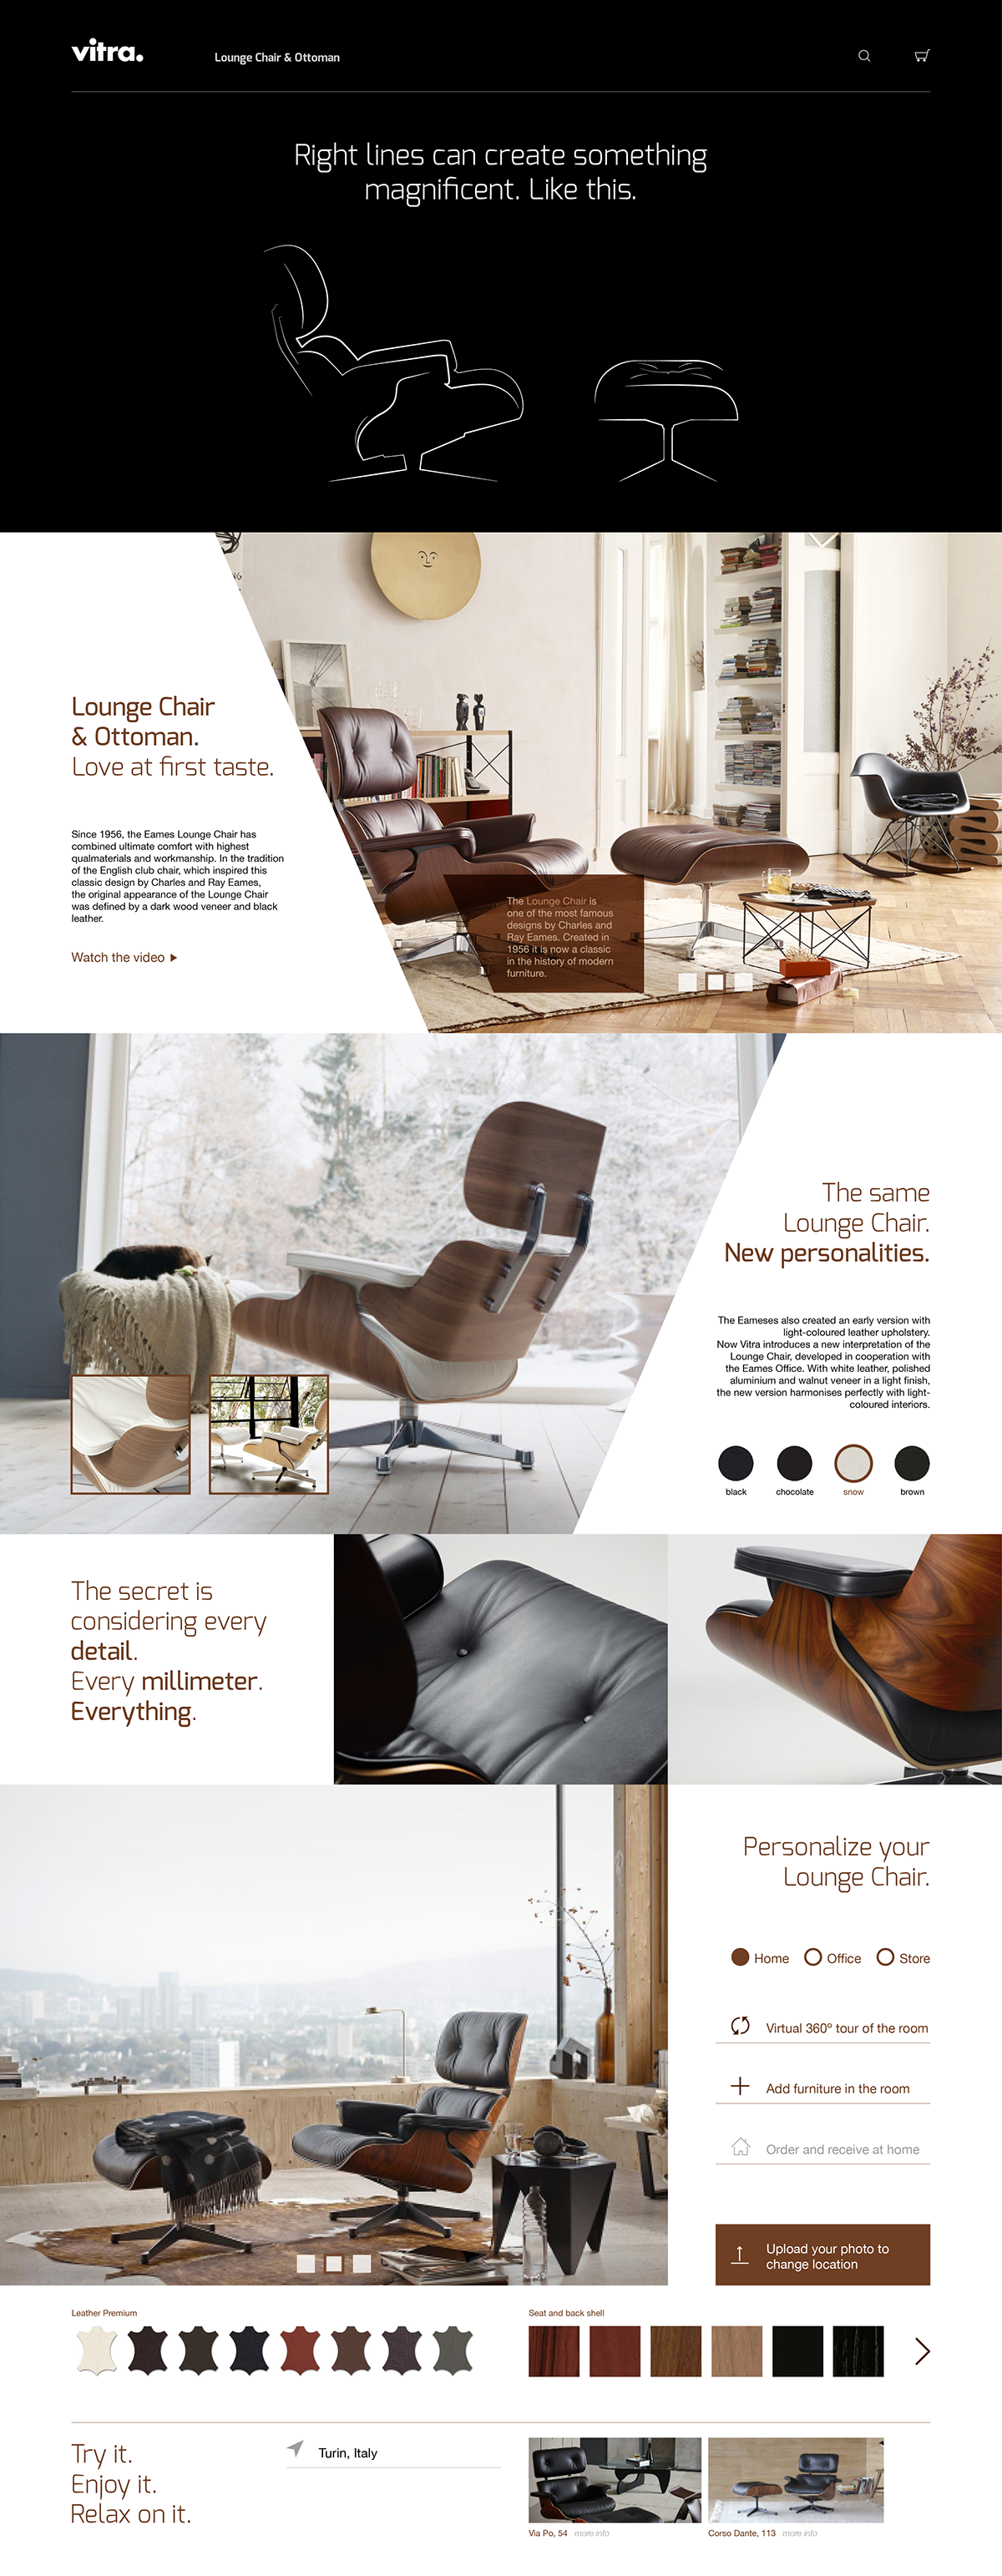 Vitra Lounge Chair concept brochure RESTYLING brochure design Web Design Inspiration interior furniture Graphic Ideas Charles Eames